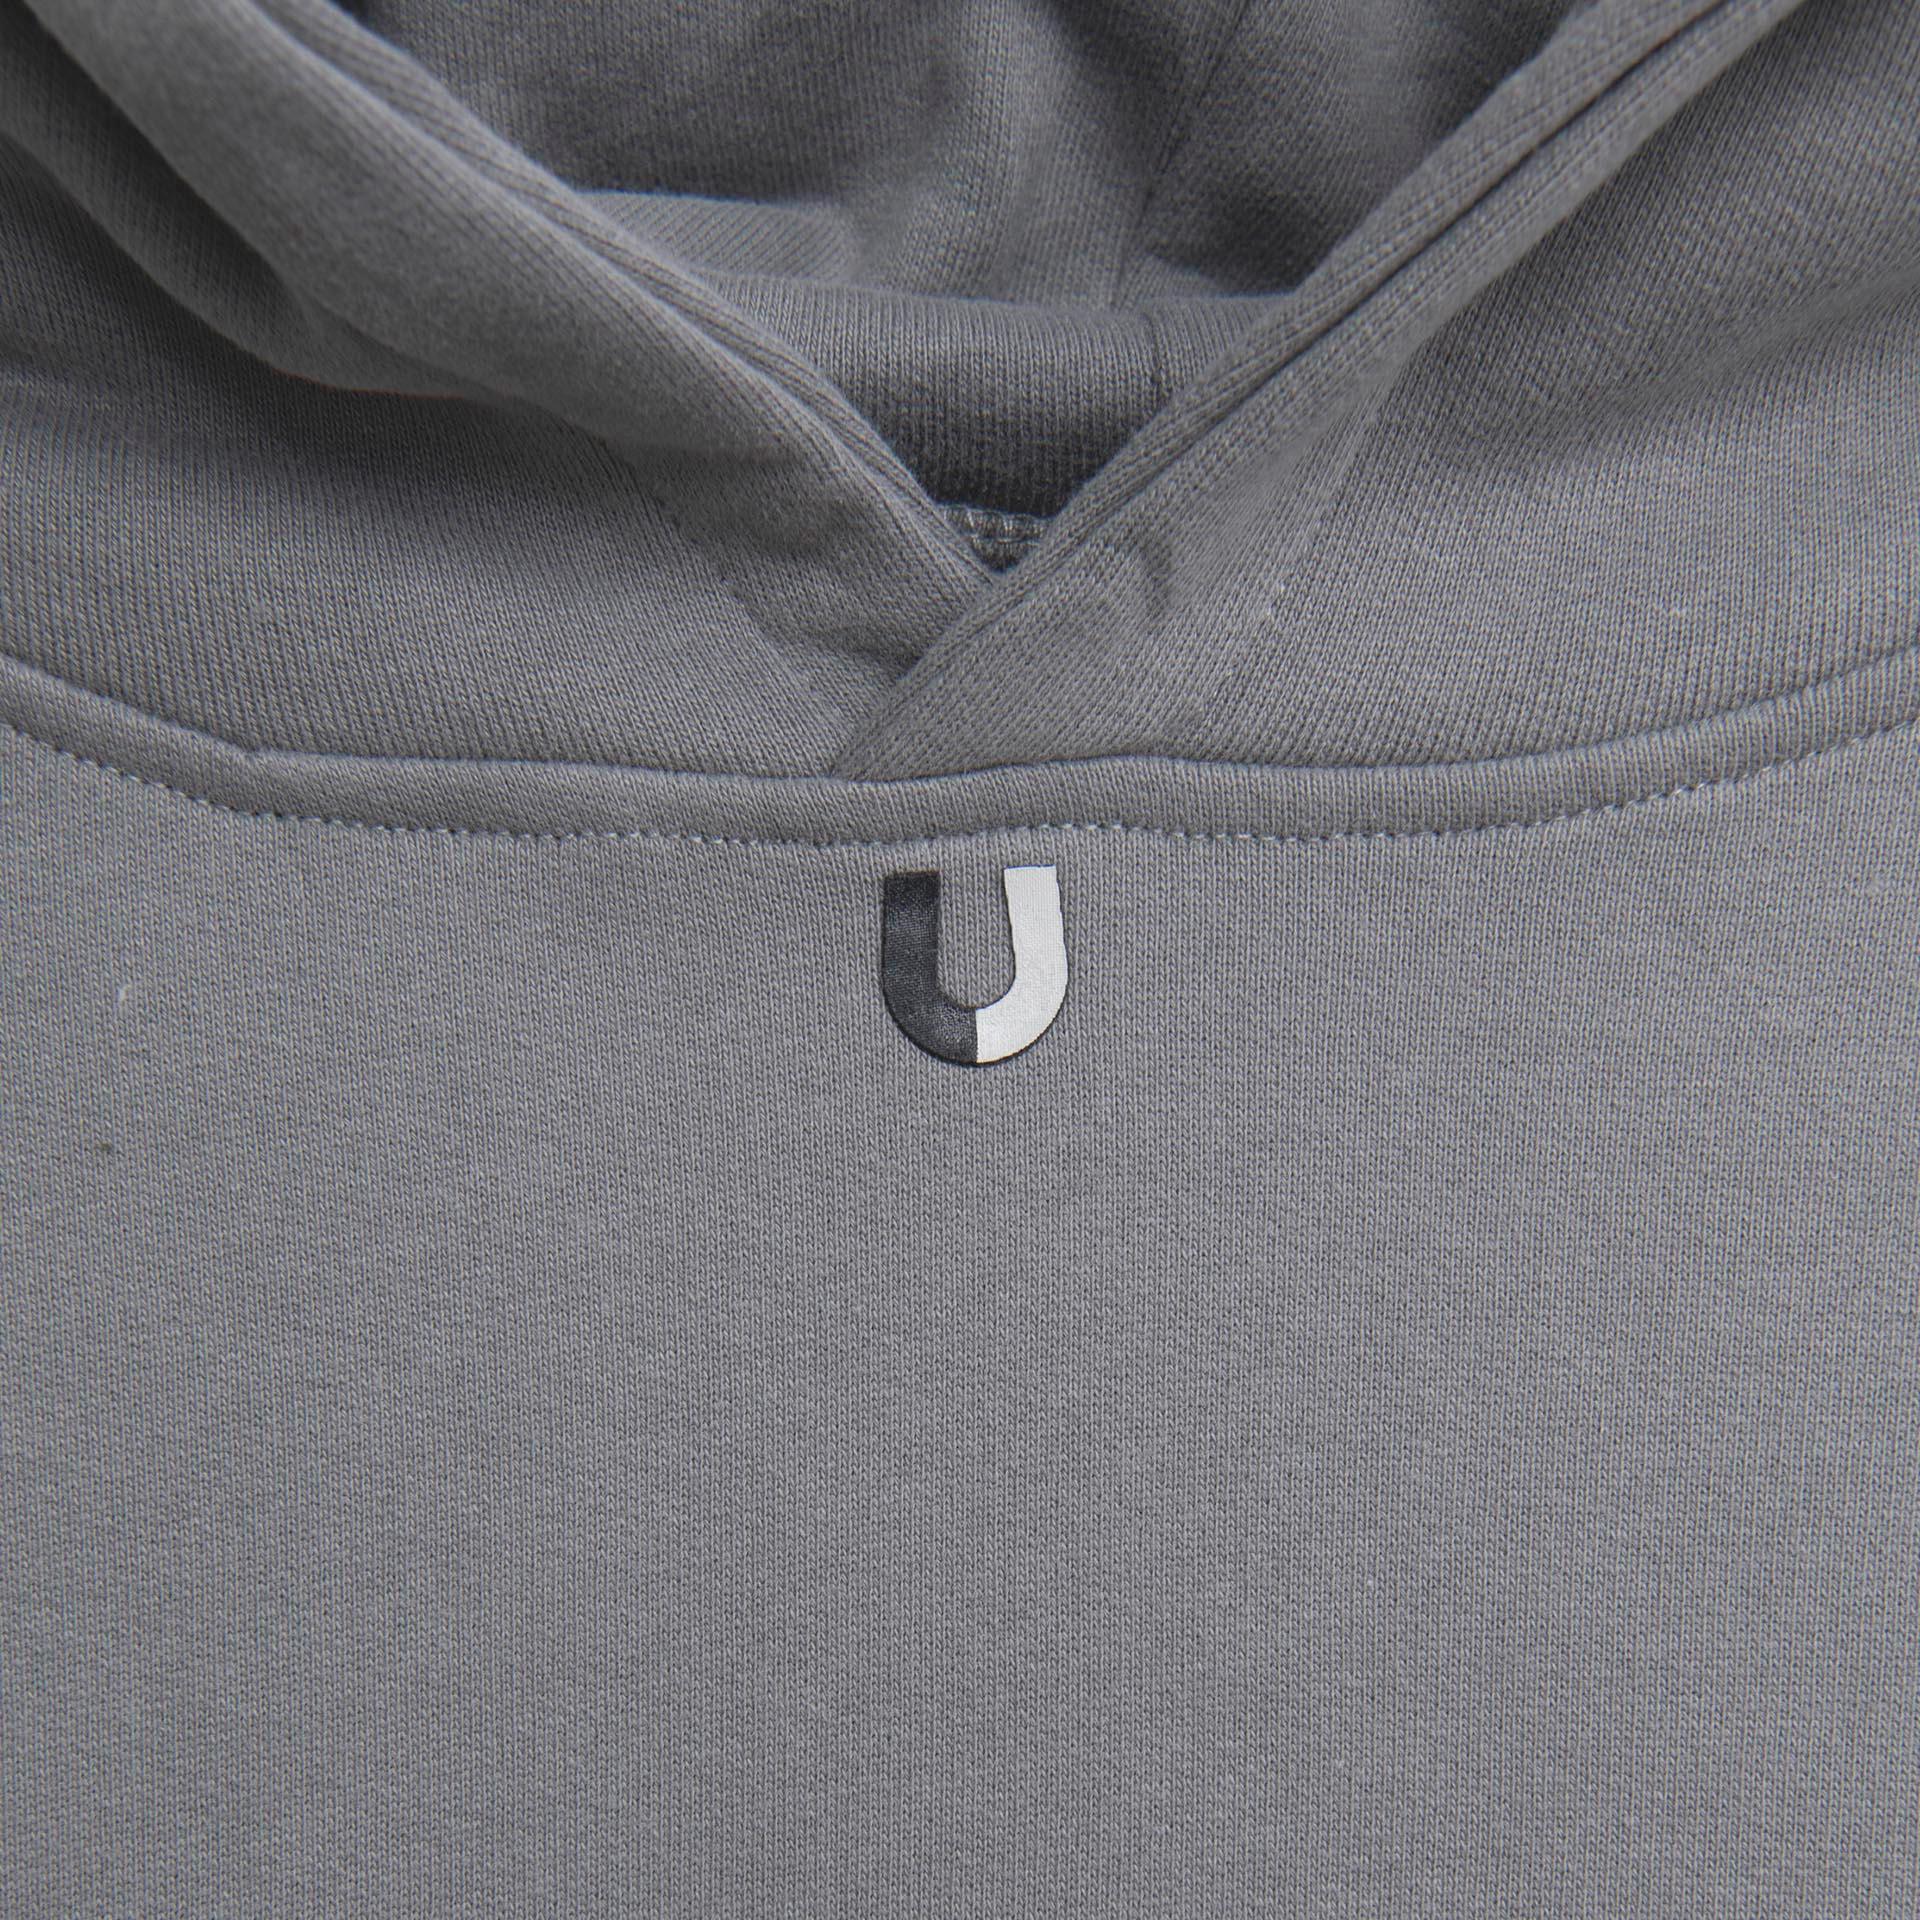 Gray Oversize Hoodie From Unisi - WECRE8